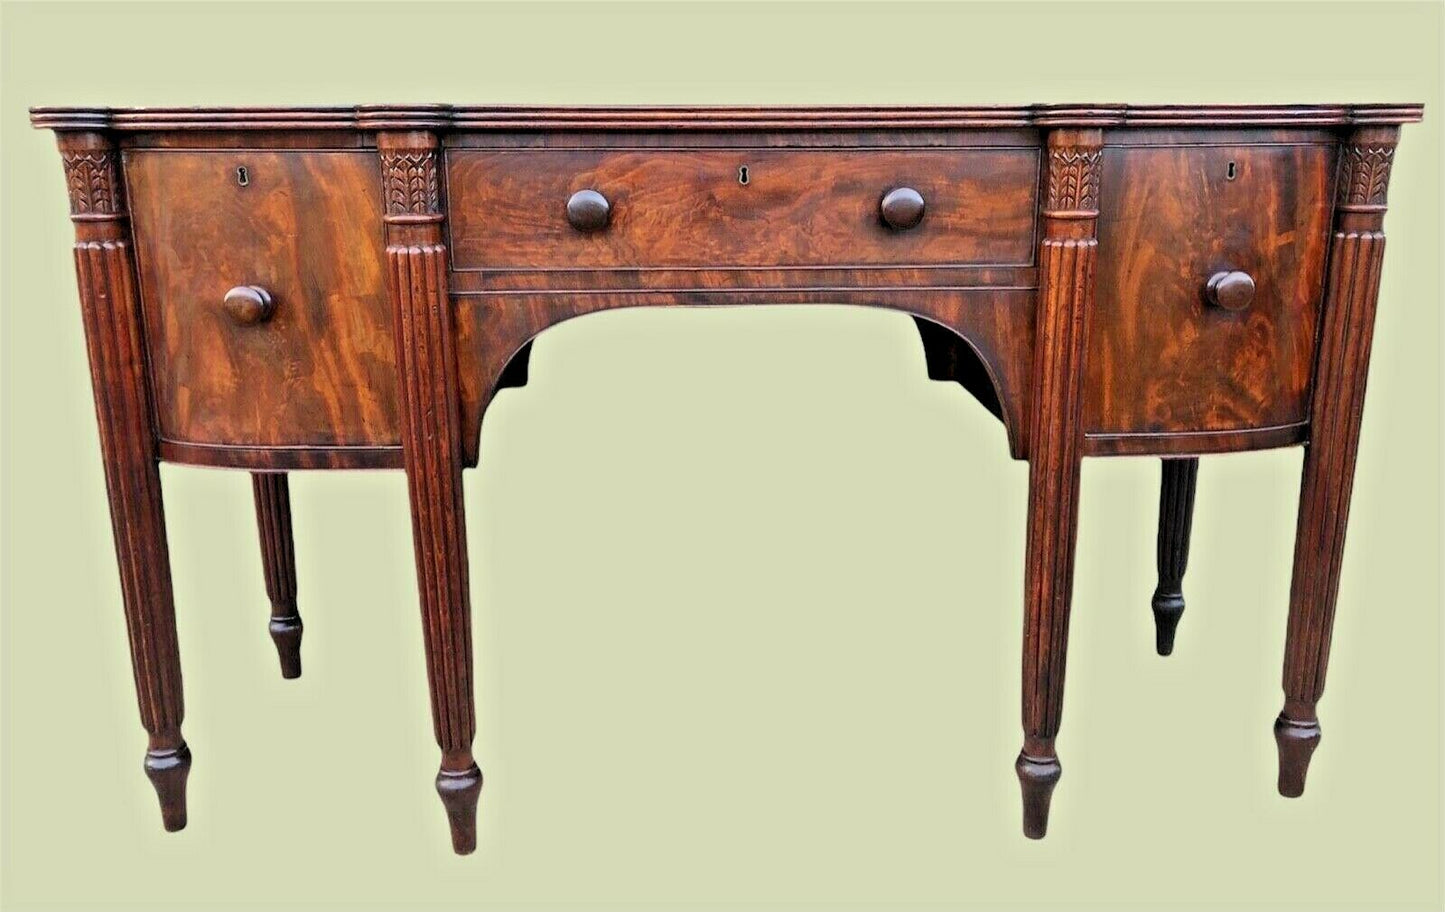 029.....Magnificent William IV Flame Mahogany Sideboard ( sold )